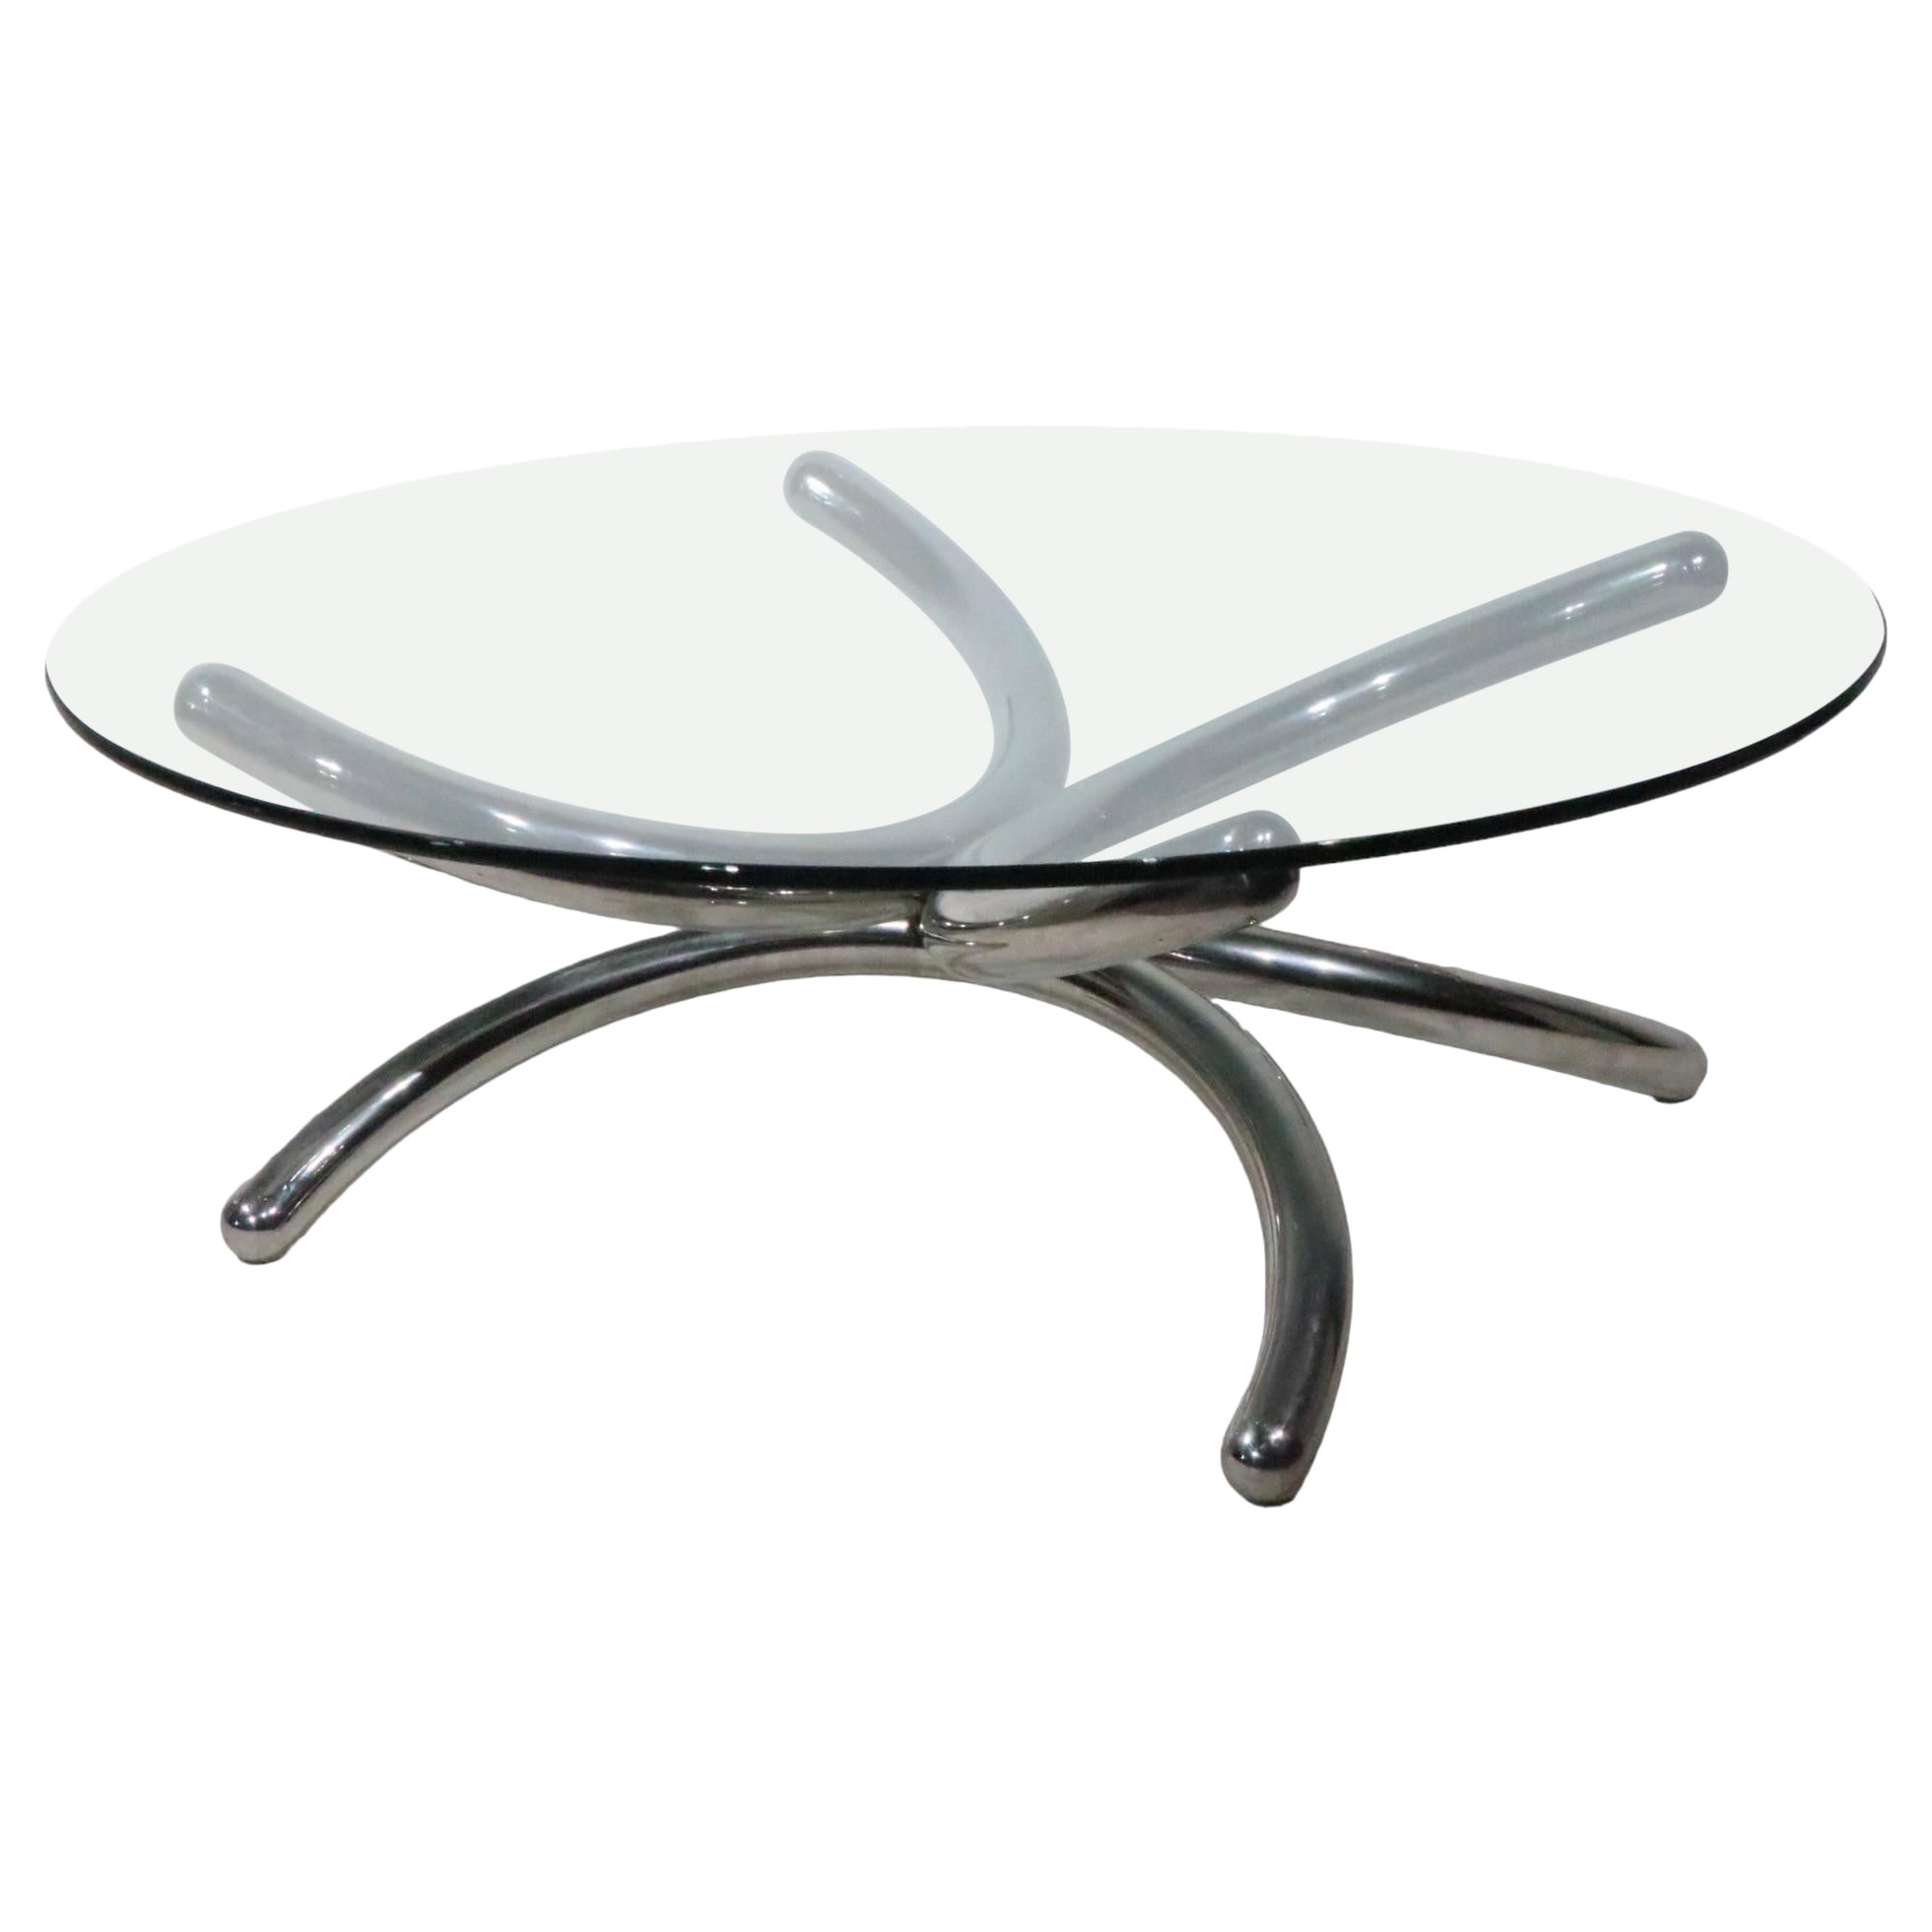  Round Chrome and Glass Coffee Cocktail Table c 1960/70s possibly Paul Tuttle  For Sale